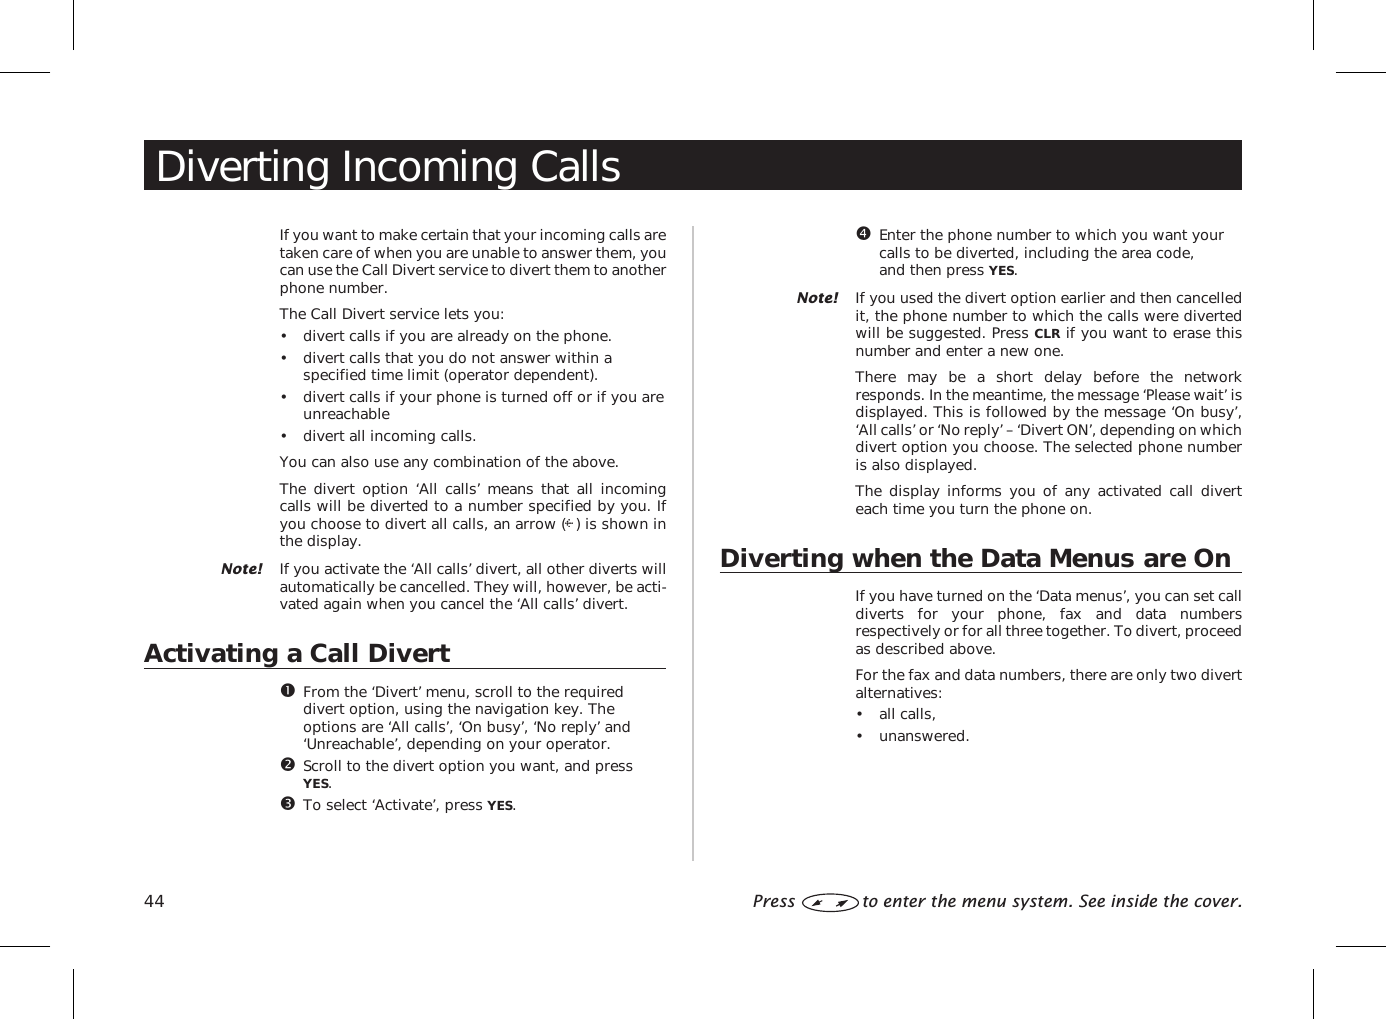 Diverting Incoming CallsIf you want to make certain that your incoming calls aretaken care of when you are unable to answer them, youcan use the Call Divert service to divert them to anotherphone number.The Call Divert service lets you:• divert calls if you are already on the phone.• divert calls that you do not answer within aspecified time limit (operator dependent).• divert calls if your phone is turned off or if you areunreachable• divert all incoming calls.You can also use any combination of the above.The divert option ‘All calls’ means that all incomingcalls will be diverted to a number specified by you. Ifyou choose to divert all calls, an arrow ( ) is shown inthe display.Note! If you activate the ‘All calls’ divert, all other diverts willautomatically be cancelled. They will, however, be acti-vated again when you cancel the ‘All calls’ divert.Activating a Call DivertFrom the ‘Divert’ menu, scroll to the requireddivert option, using the navigation key. Theoptions are ‘All calls’, ‘On busy’, ‘No reply’ and‘Unreachable’, depending on your operator.Scroll to the divert option you want, and pressYES.To select ‘Activate’, press YES.Enter the phone number to which you want yourcalls to be diverted, including the area code,and then press YES.Note! If you used the divert option earlier and then cancelledit, the phone number to which the calls were divertedwill be suggested. Press CLR if you want to erase thisnumber and enter a new one.There may be a short delay before the networkresponds. In the meantime, the message ‘Please wait’ isdisplayed. This is followed by the message ‘On busy’,‘All calls’ or ‘No reply’ – ‘Divert ON’, depending on whichdivert option you choose. The selected phone numberis also displayed.The display informs you of any activated call diverteach time you turn the phone on.Diverting when the Data Menus are OnIf you have turned on the ‘Data menus’, you can set calldiverts for your phone, fax and data numbersrespectively or for all three together. To divert, proceedas described above.For the fax and data numbers, there are only two divertalternatives:• all calls,• unanswered.44 Press to enter the menu system. See inside the cover.